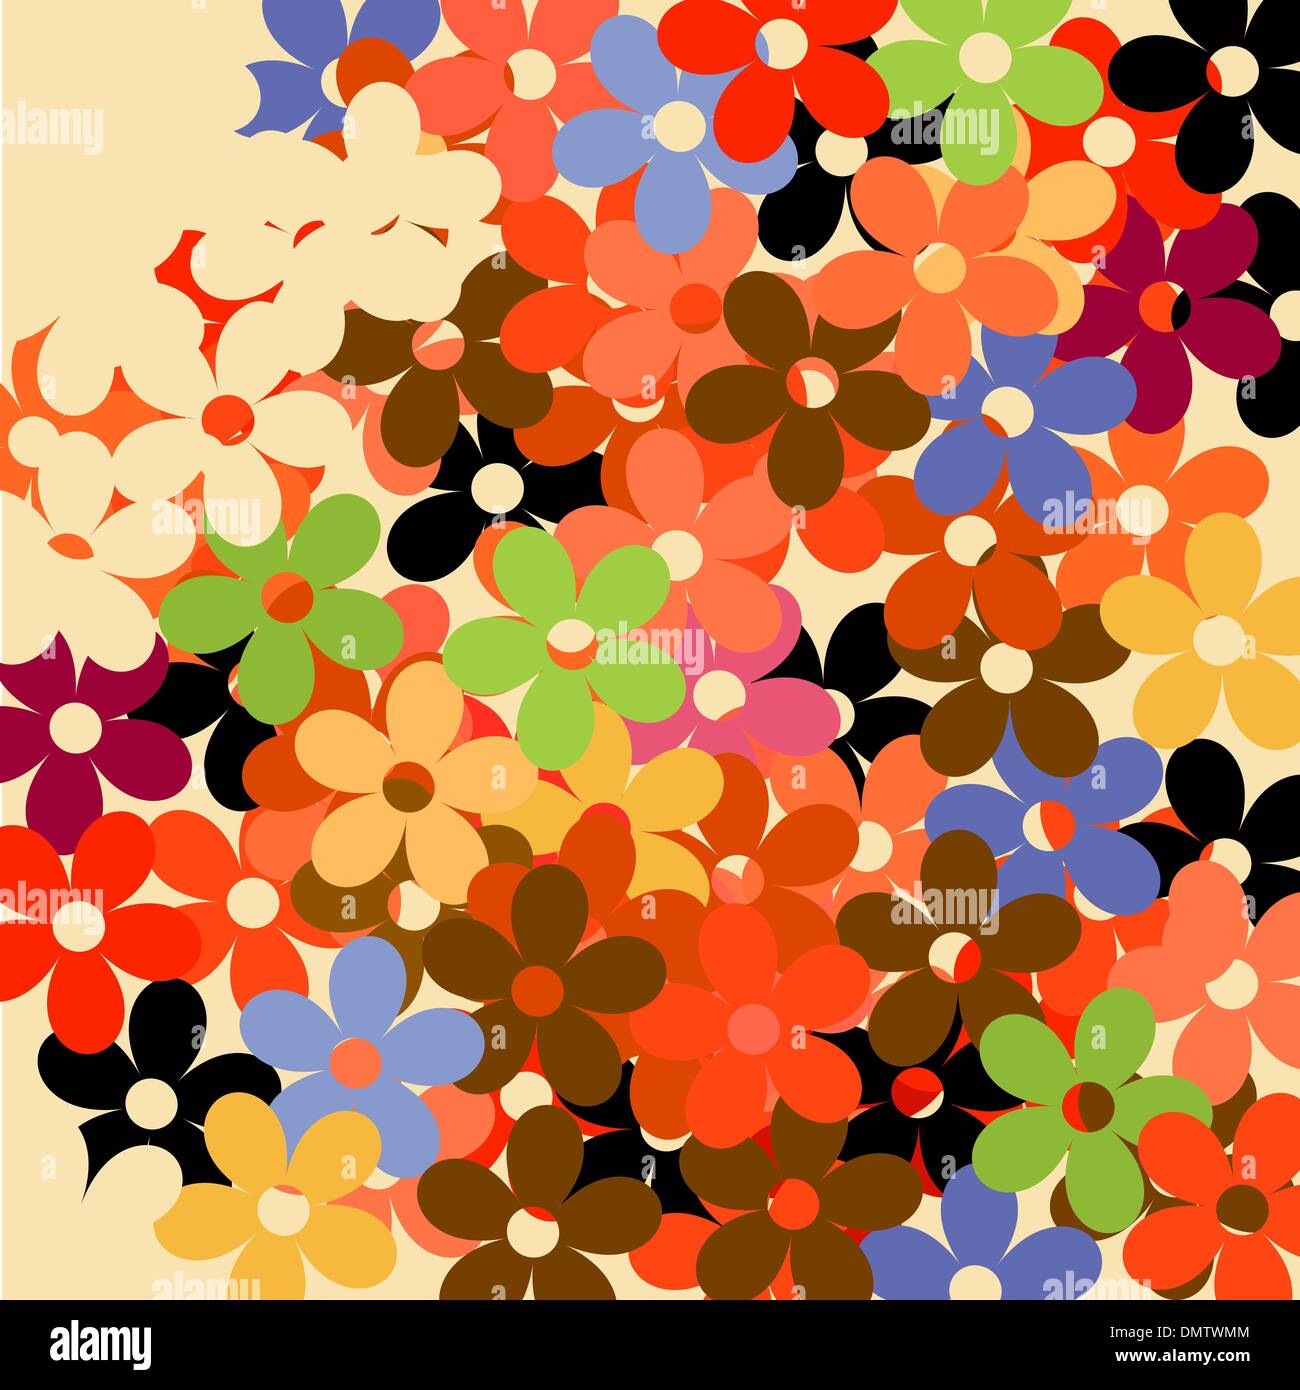 Decorative floral pattern Stock Vector